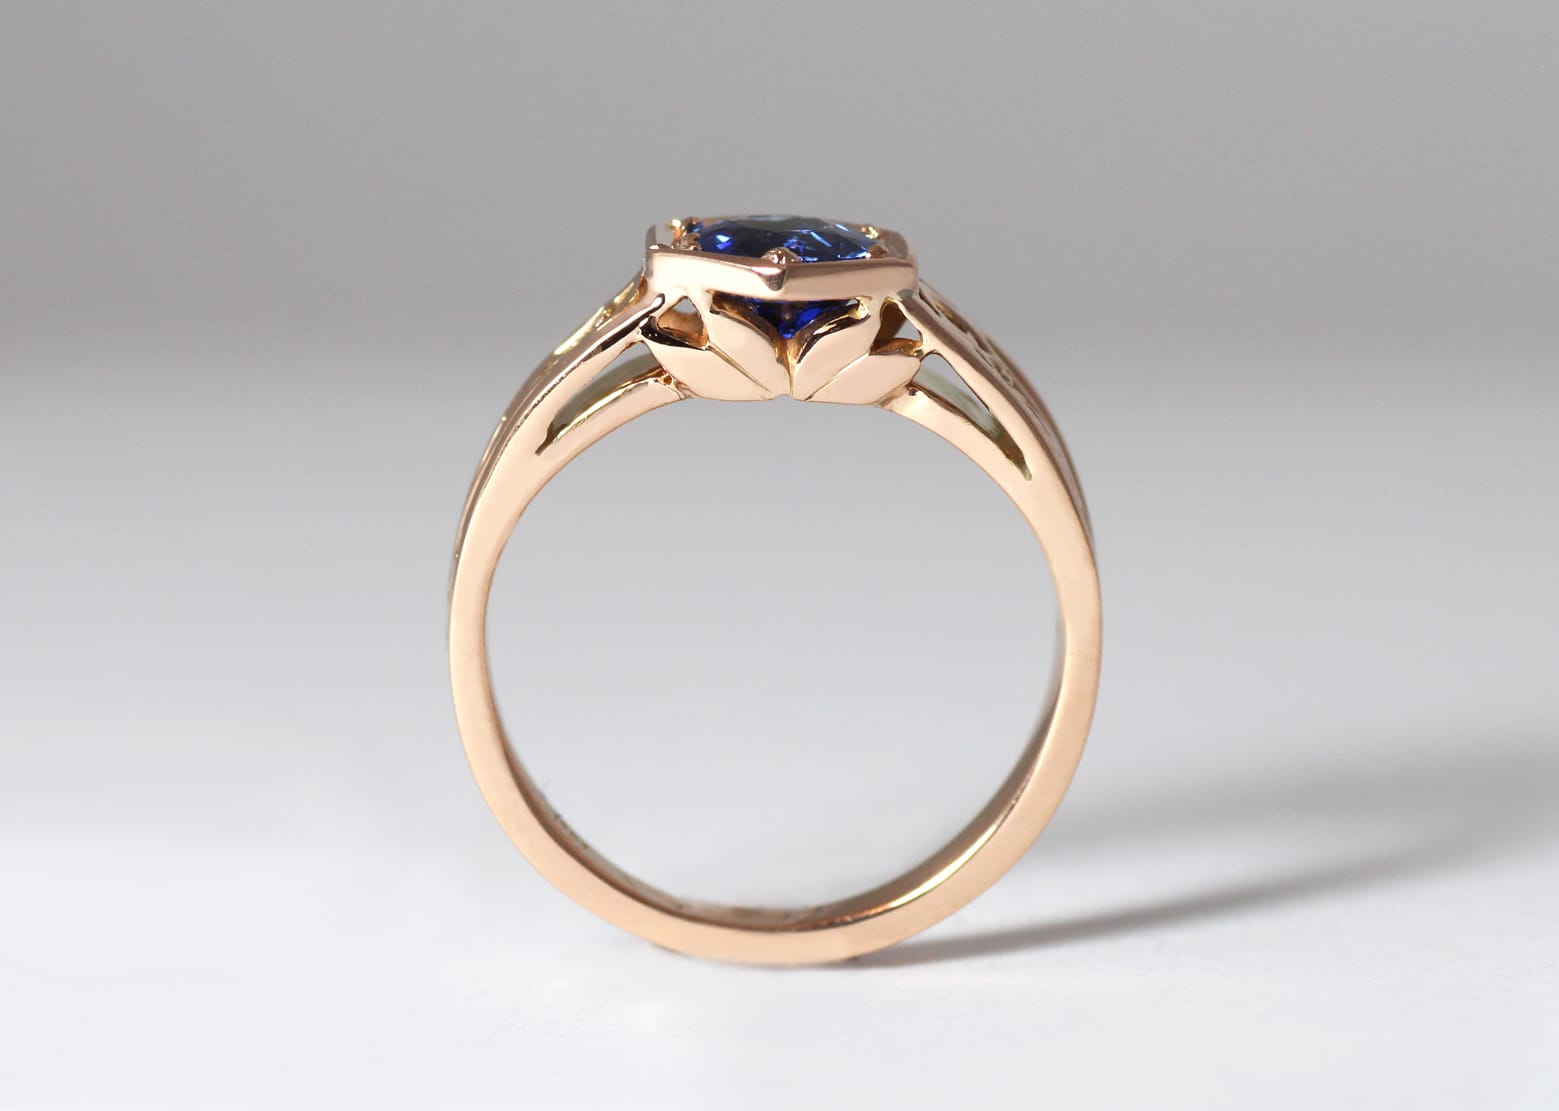 18ct Fairtrade gold with blue sapphire by Zoe Pook Jewellery